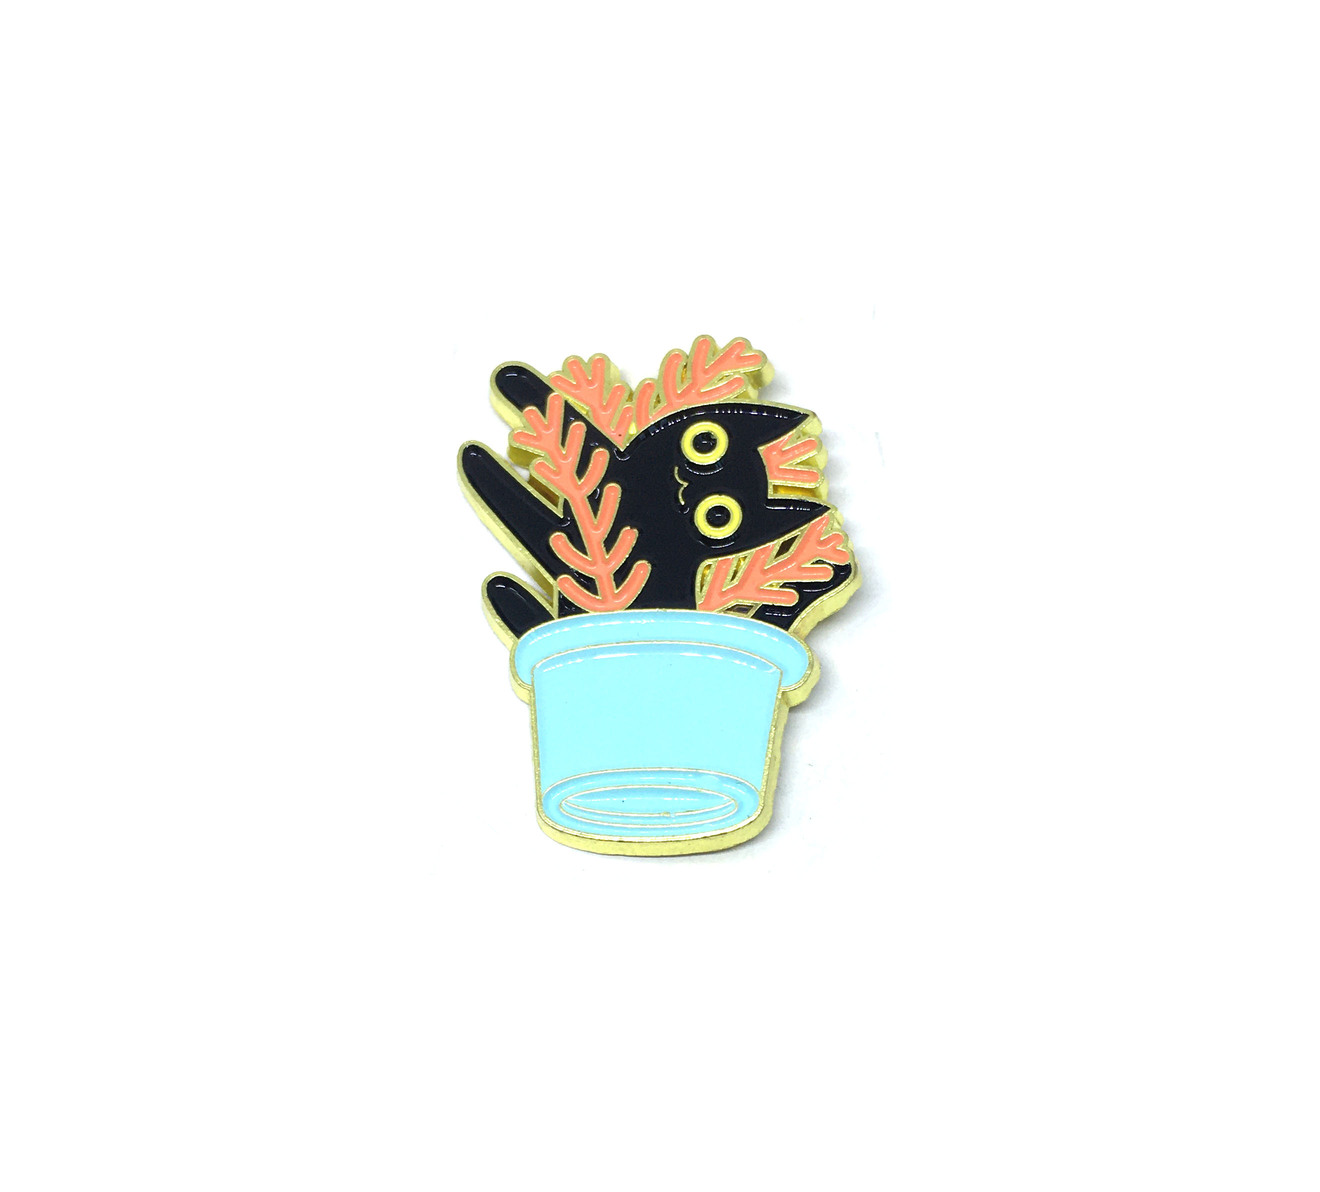 Potted Plant Black Cat Pin